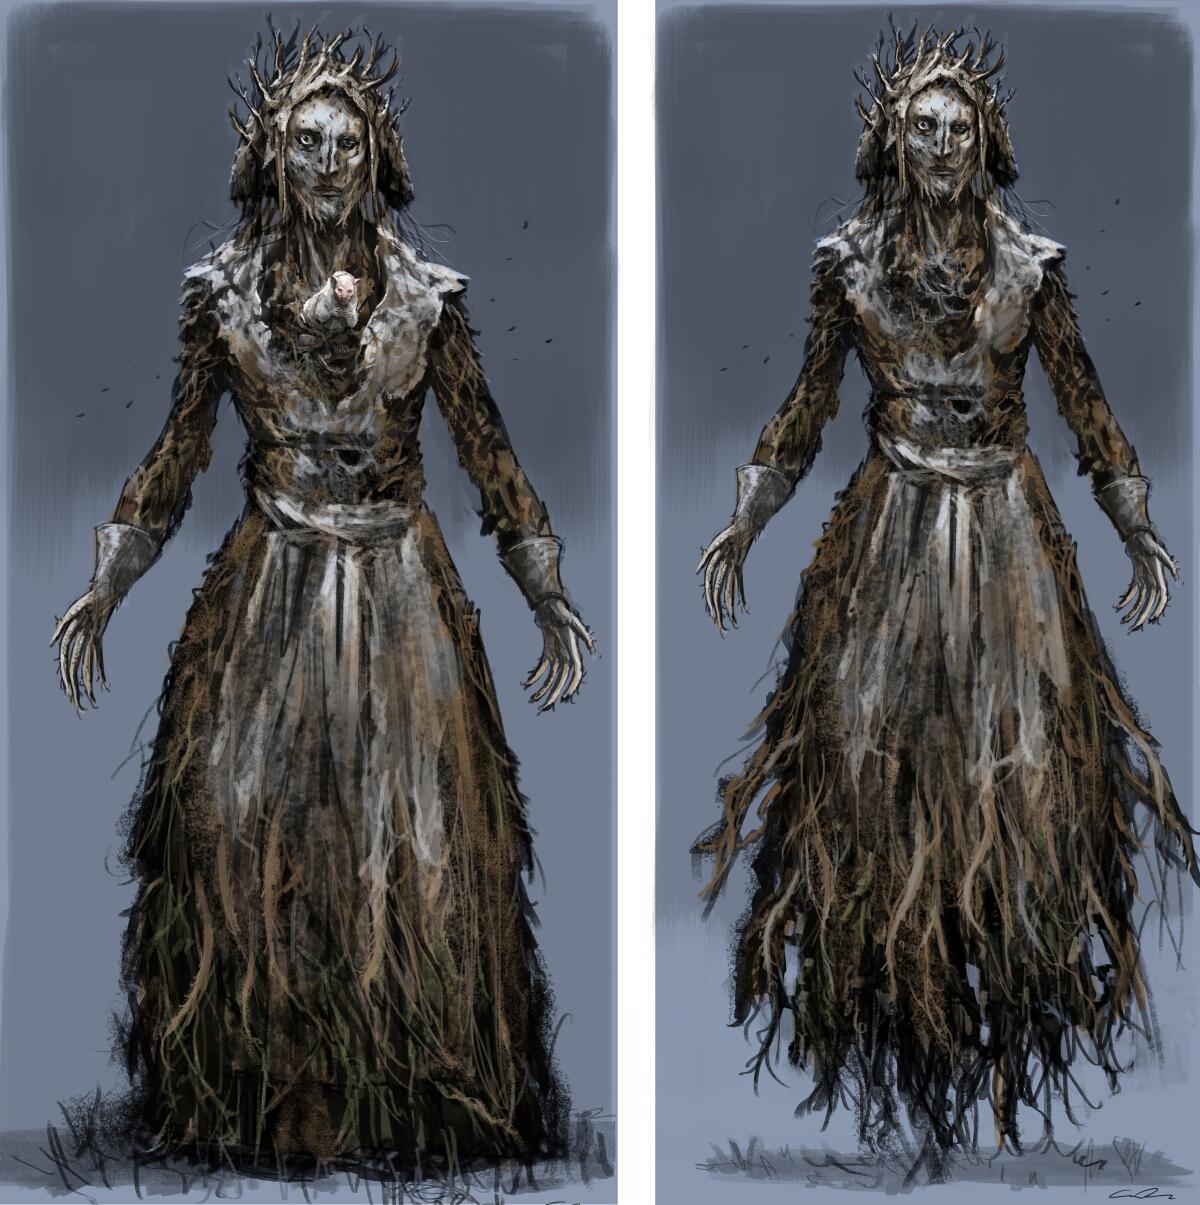 Two drawings of the witch character from "Guillermo del Toro's Cabinet of Curiosities" showing how she seems made of wood